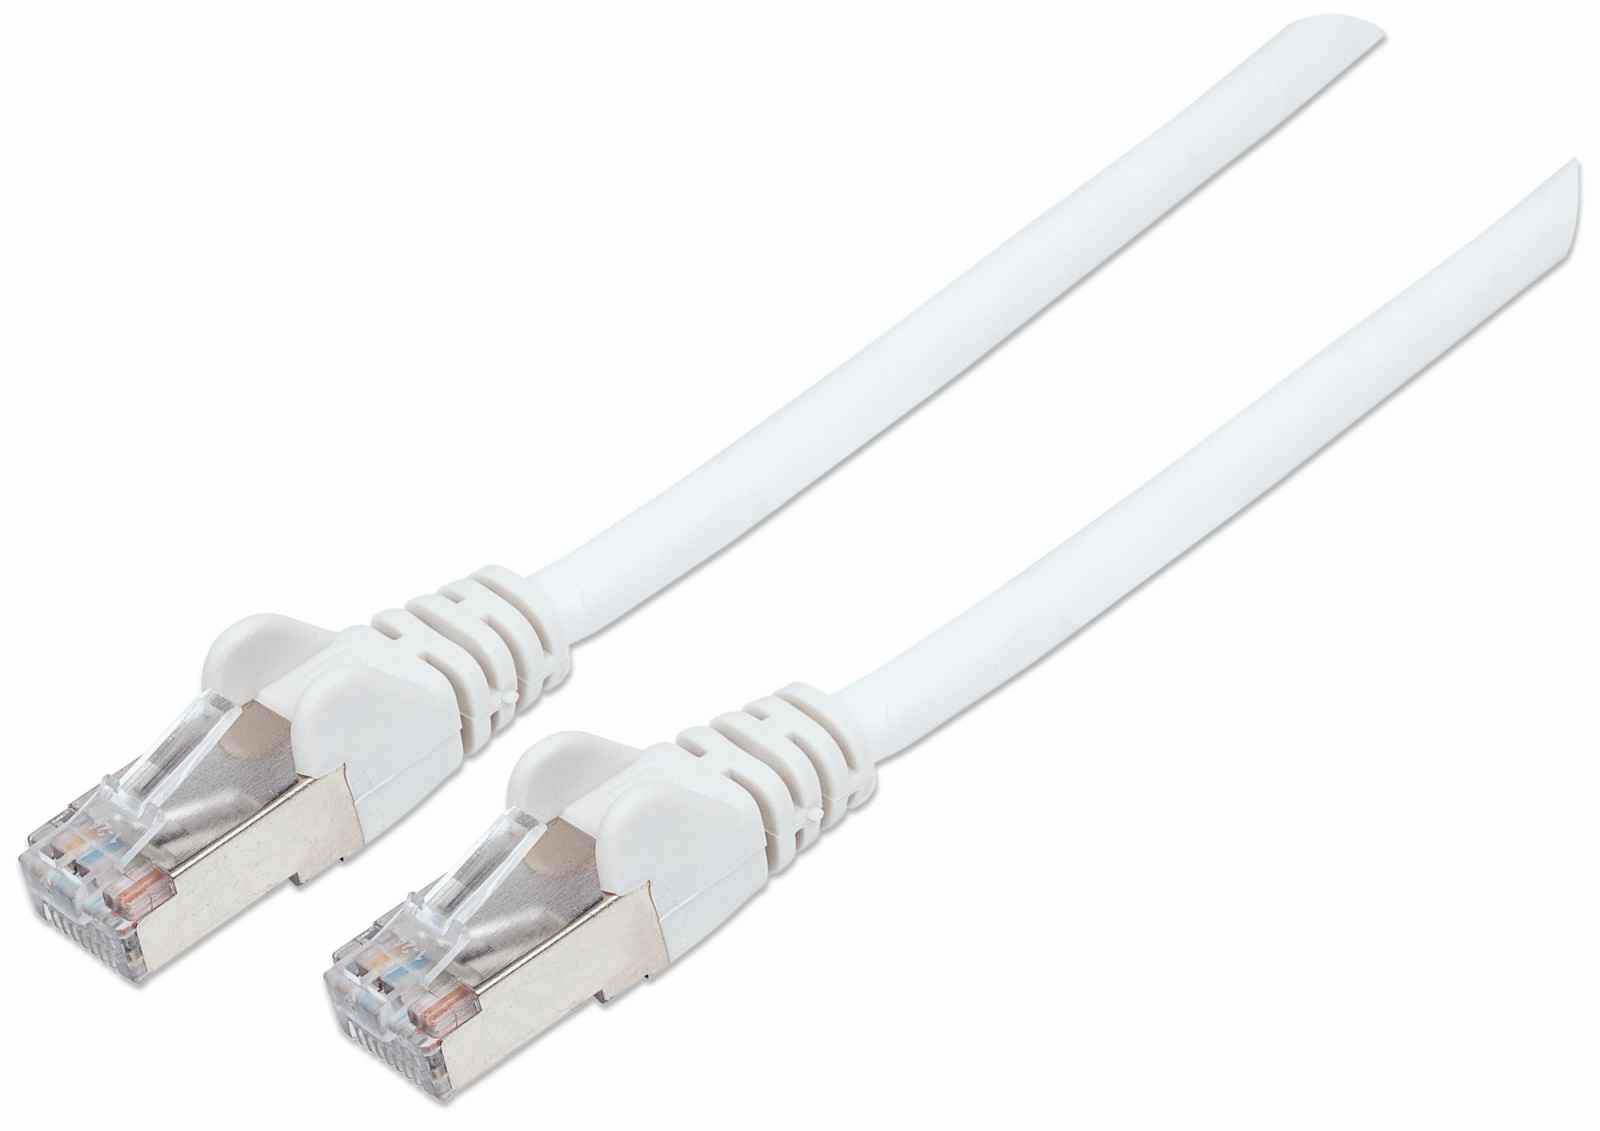 Photos - Cable (video, audio, USB) INTELLINET Network Patch Cable, Cat7 Cable/Cat6A Plugs, 0.25m, White, 7419 